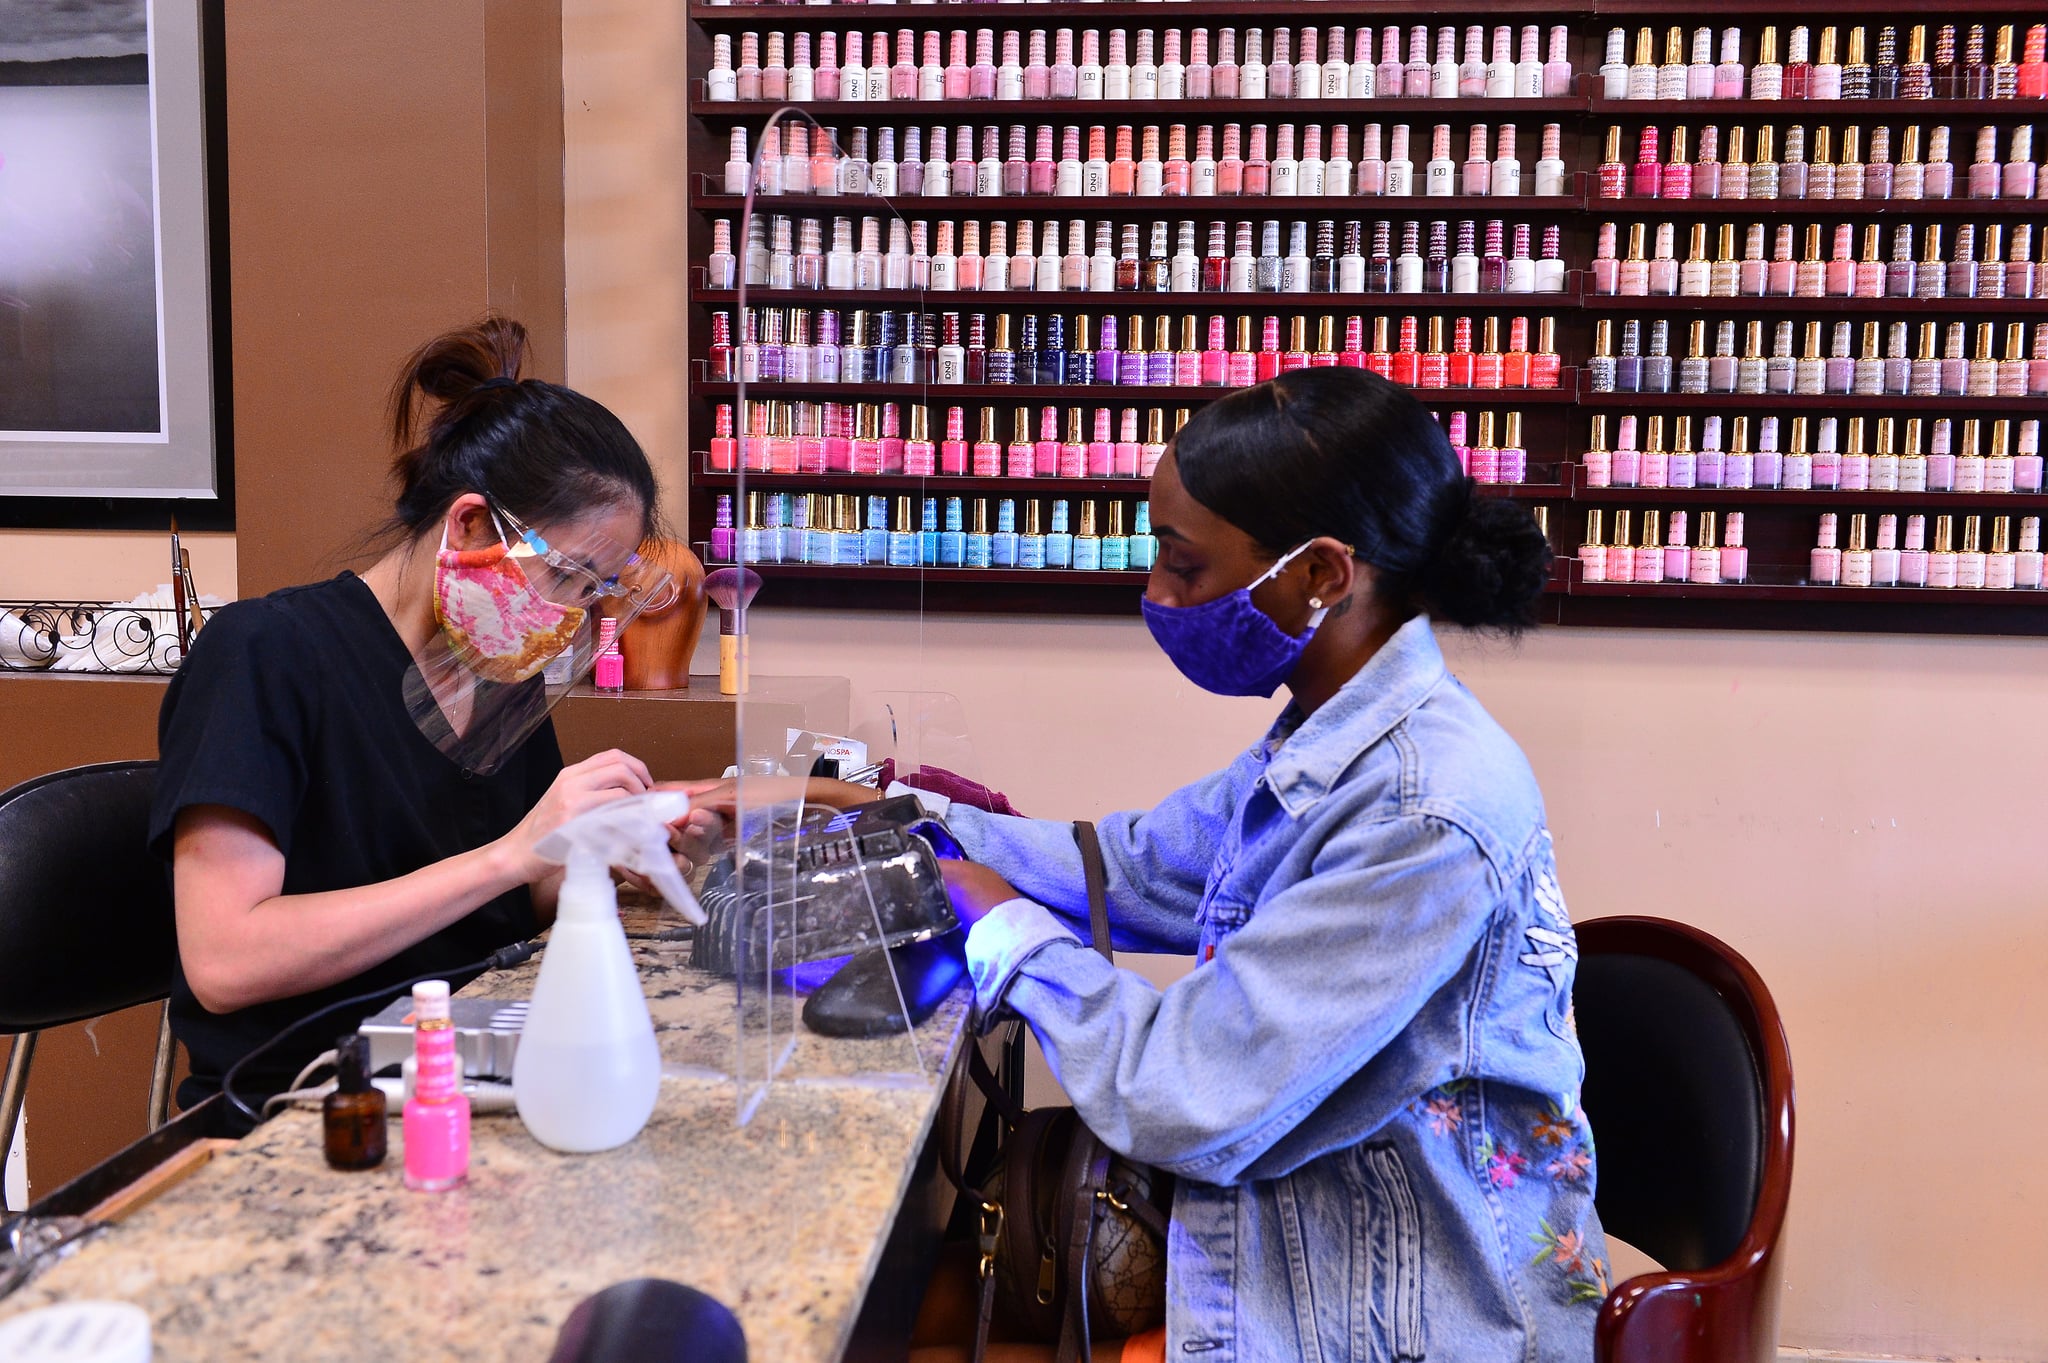 What It's Like Reopening a Nail Salon Amid COVID-19